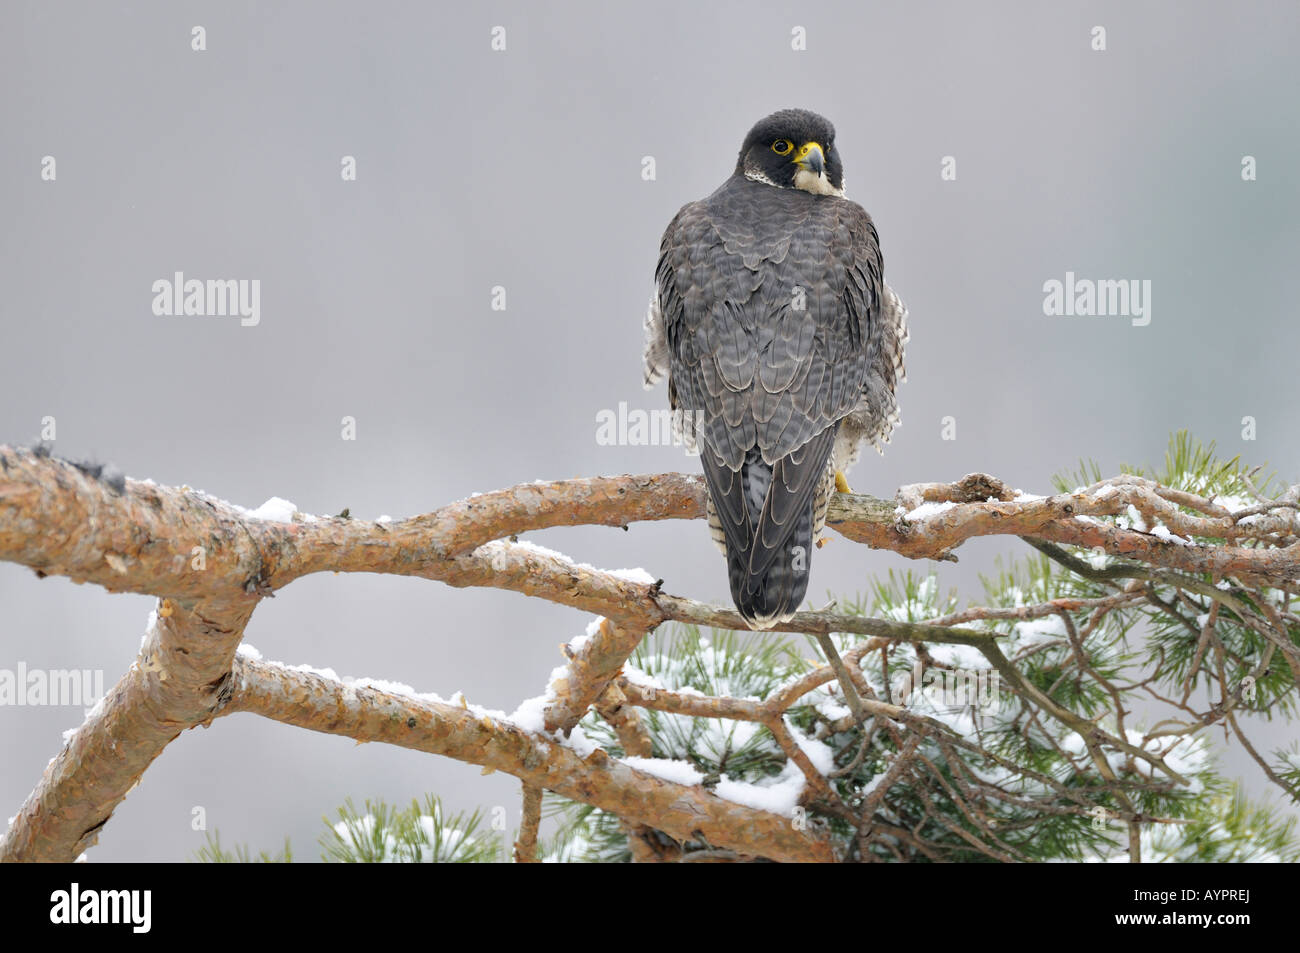 Peregrine Falcon (Falco peregrinus) perched on a pine branch, Schwaebische Alb, Baden-Wuerttemberg, Germany Stock Photo